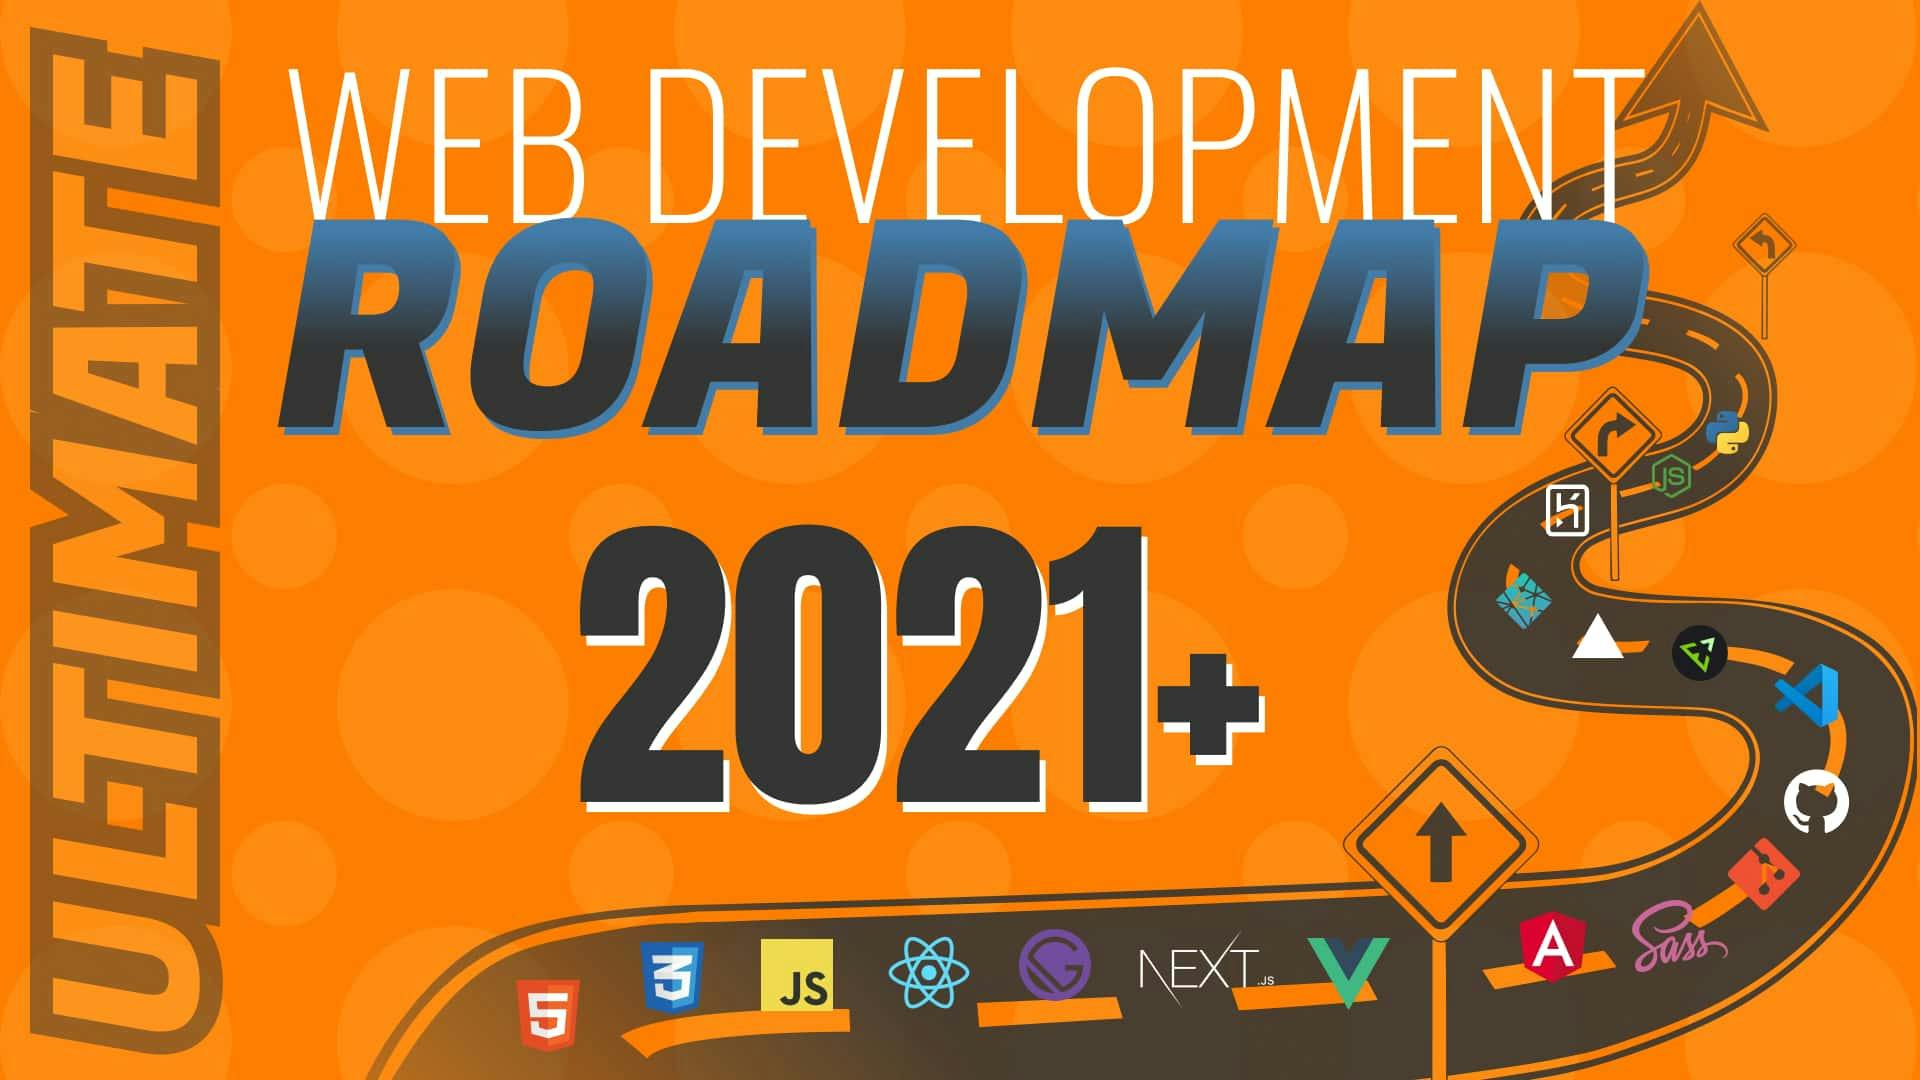 Cover Image for Ultimate Guide to Web Development in 2021 & Beyond! | Roadmap 2021+